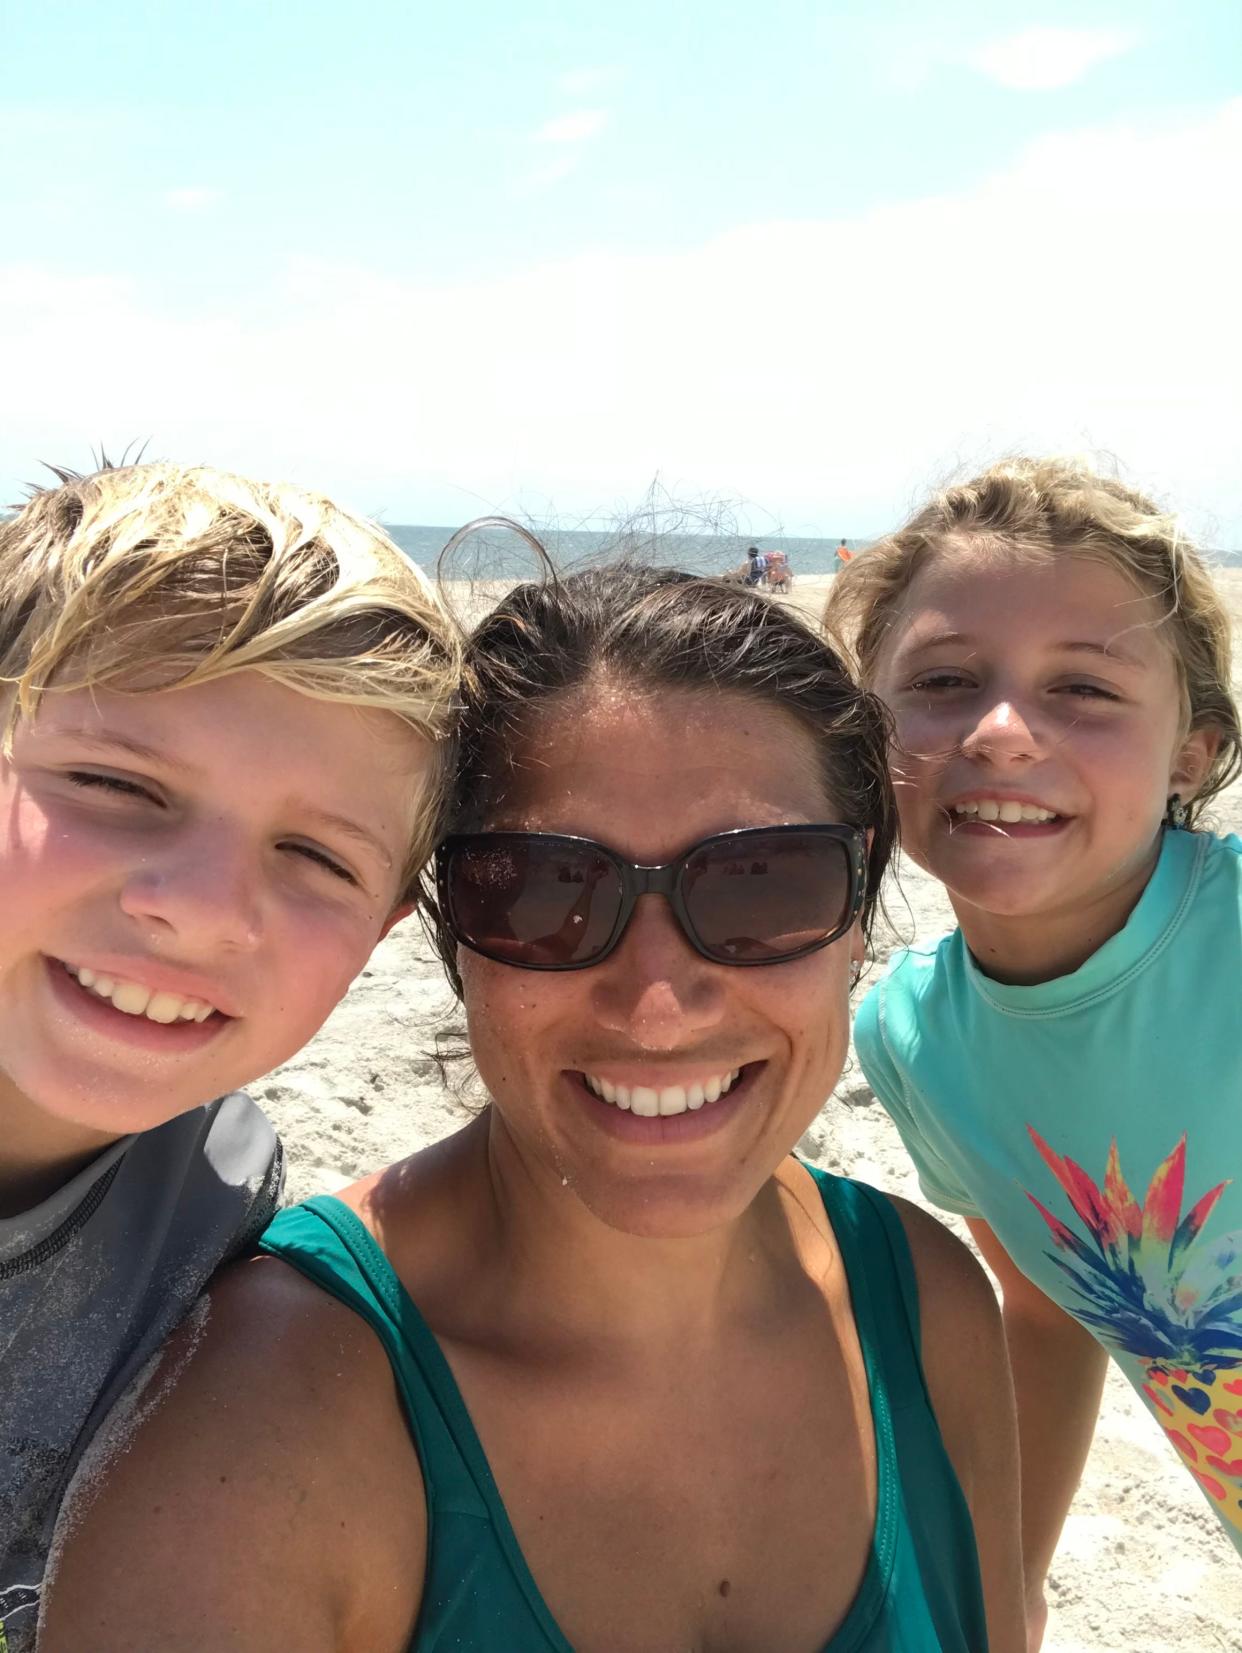 Racheal Blakney enjoys time with her twins, Cyrus and Piper, on a trip to Carolina Beach in August 2020.